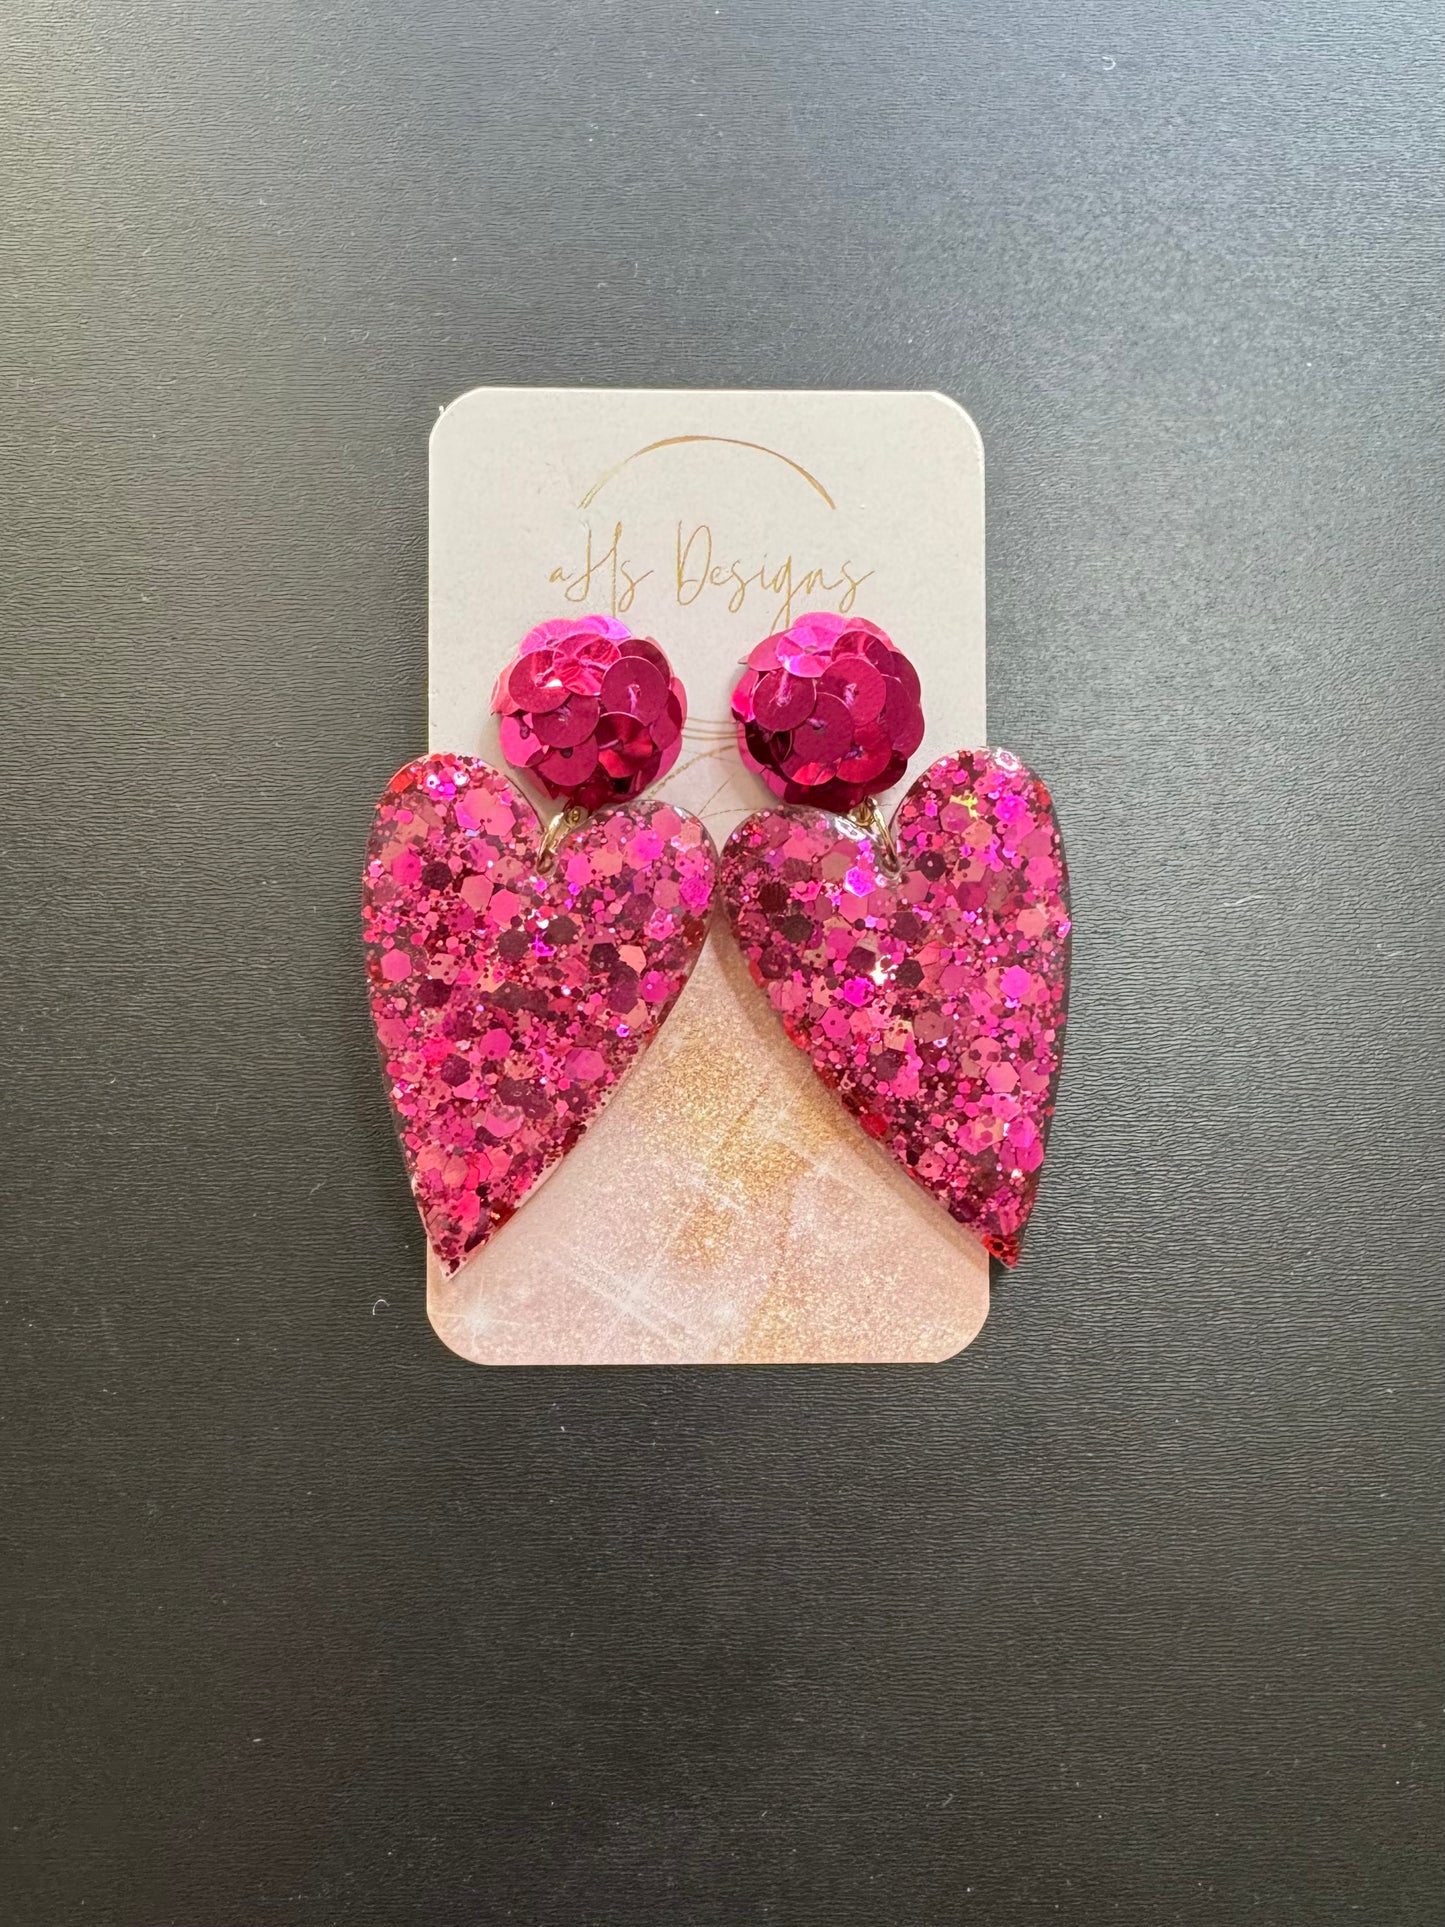 XOXO Heart Earrings with Sequin Topper